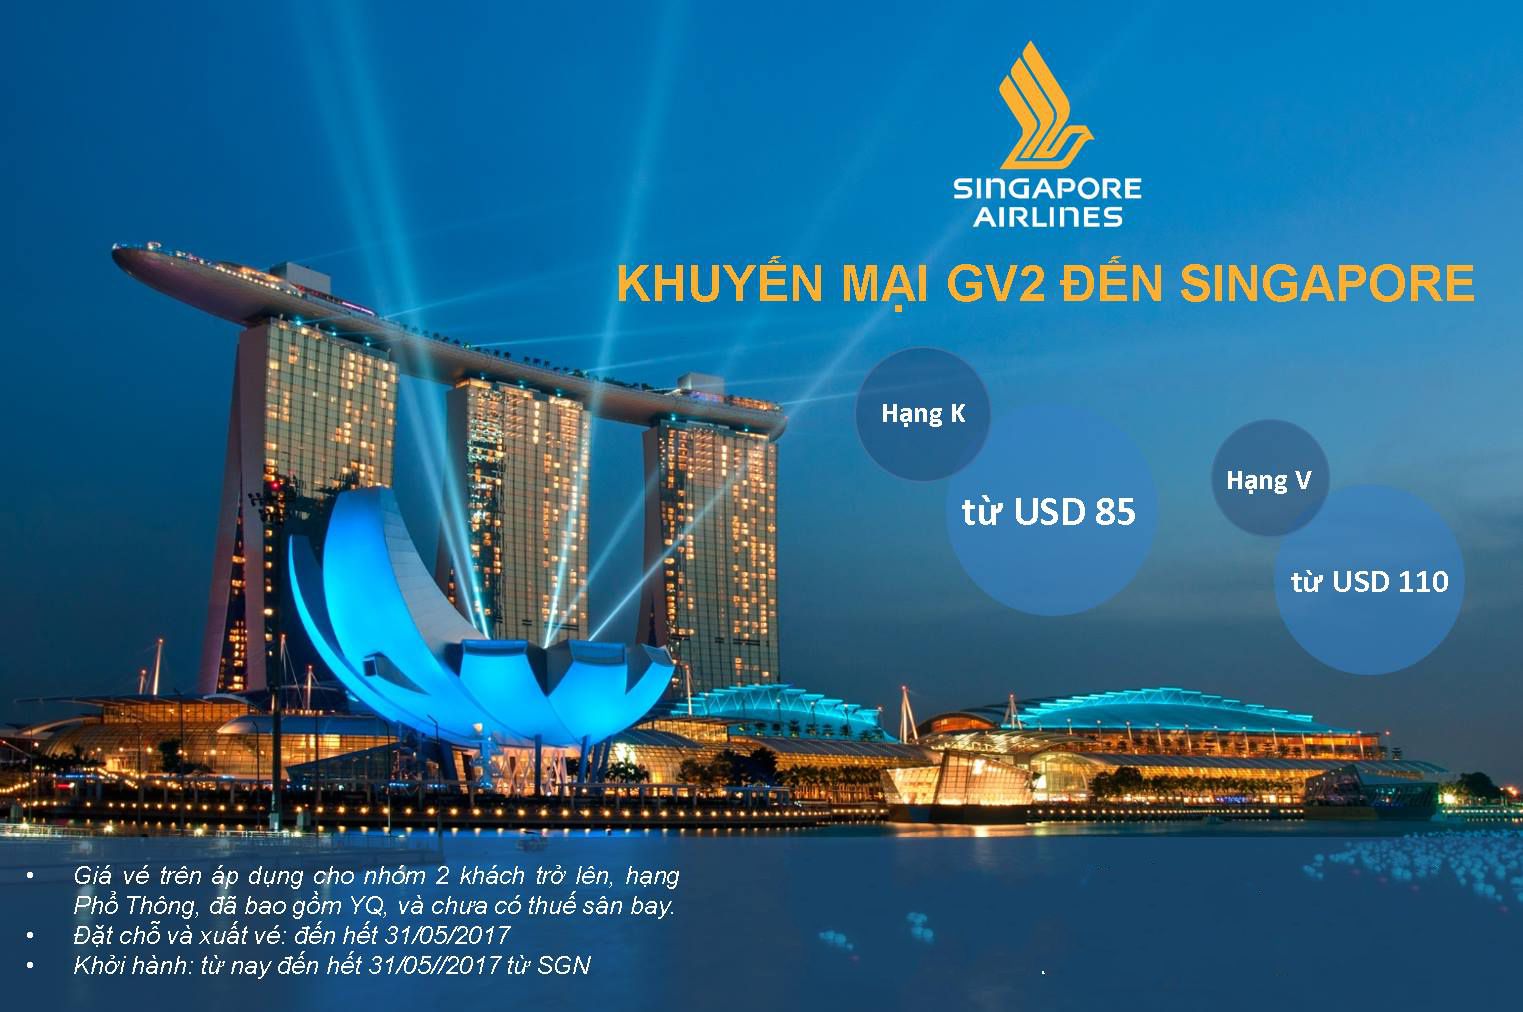 Singapore Airlines khuyến mãi